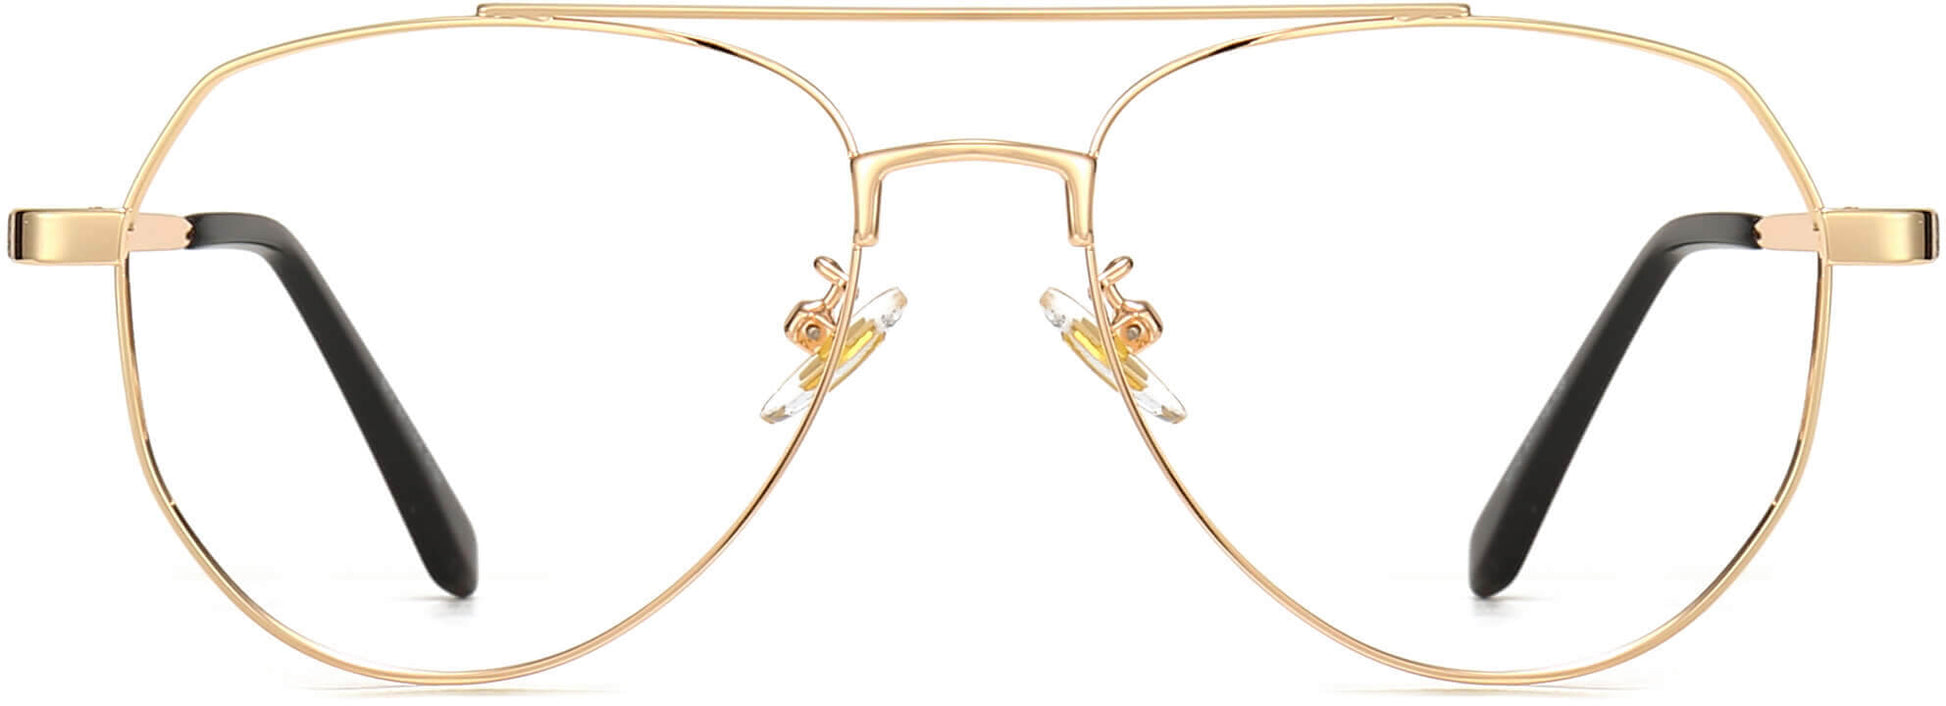 Jorge Aviator Gold Eyeglasses from ANRRI, front view